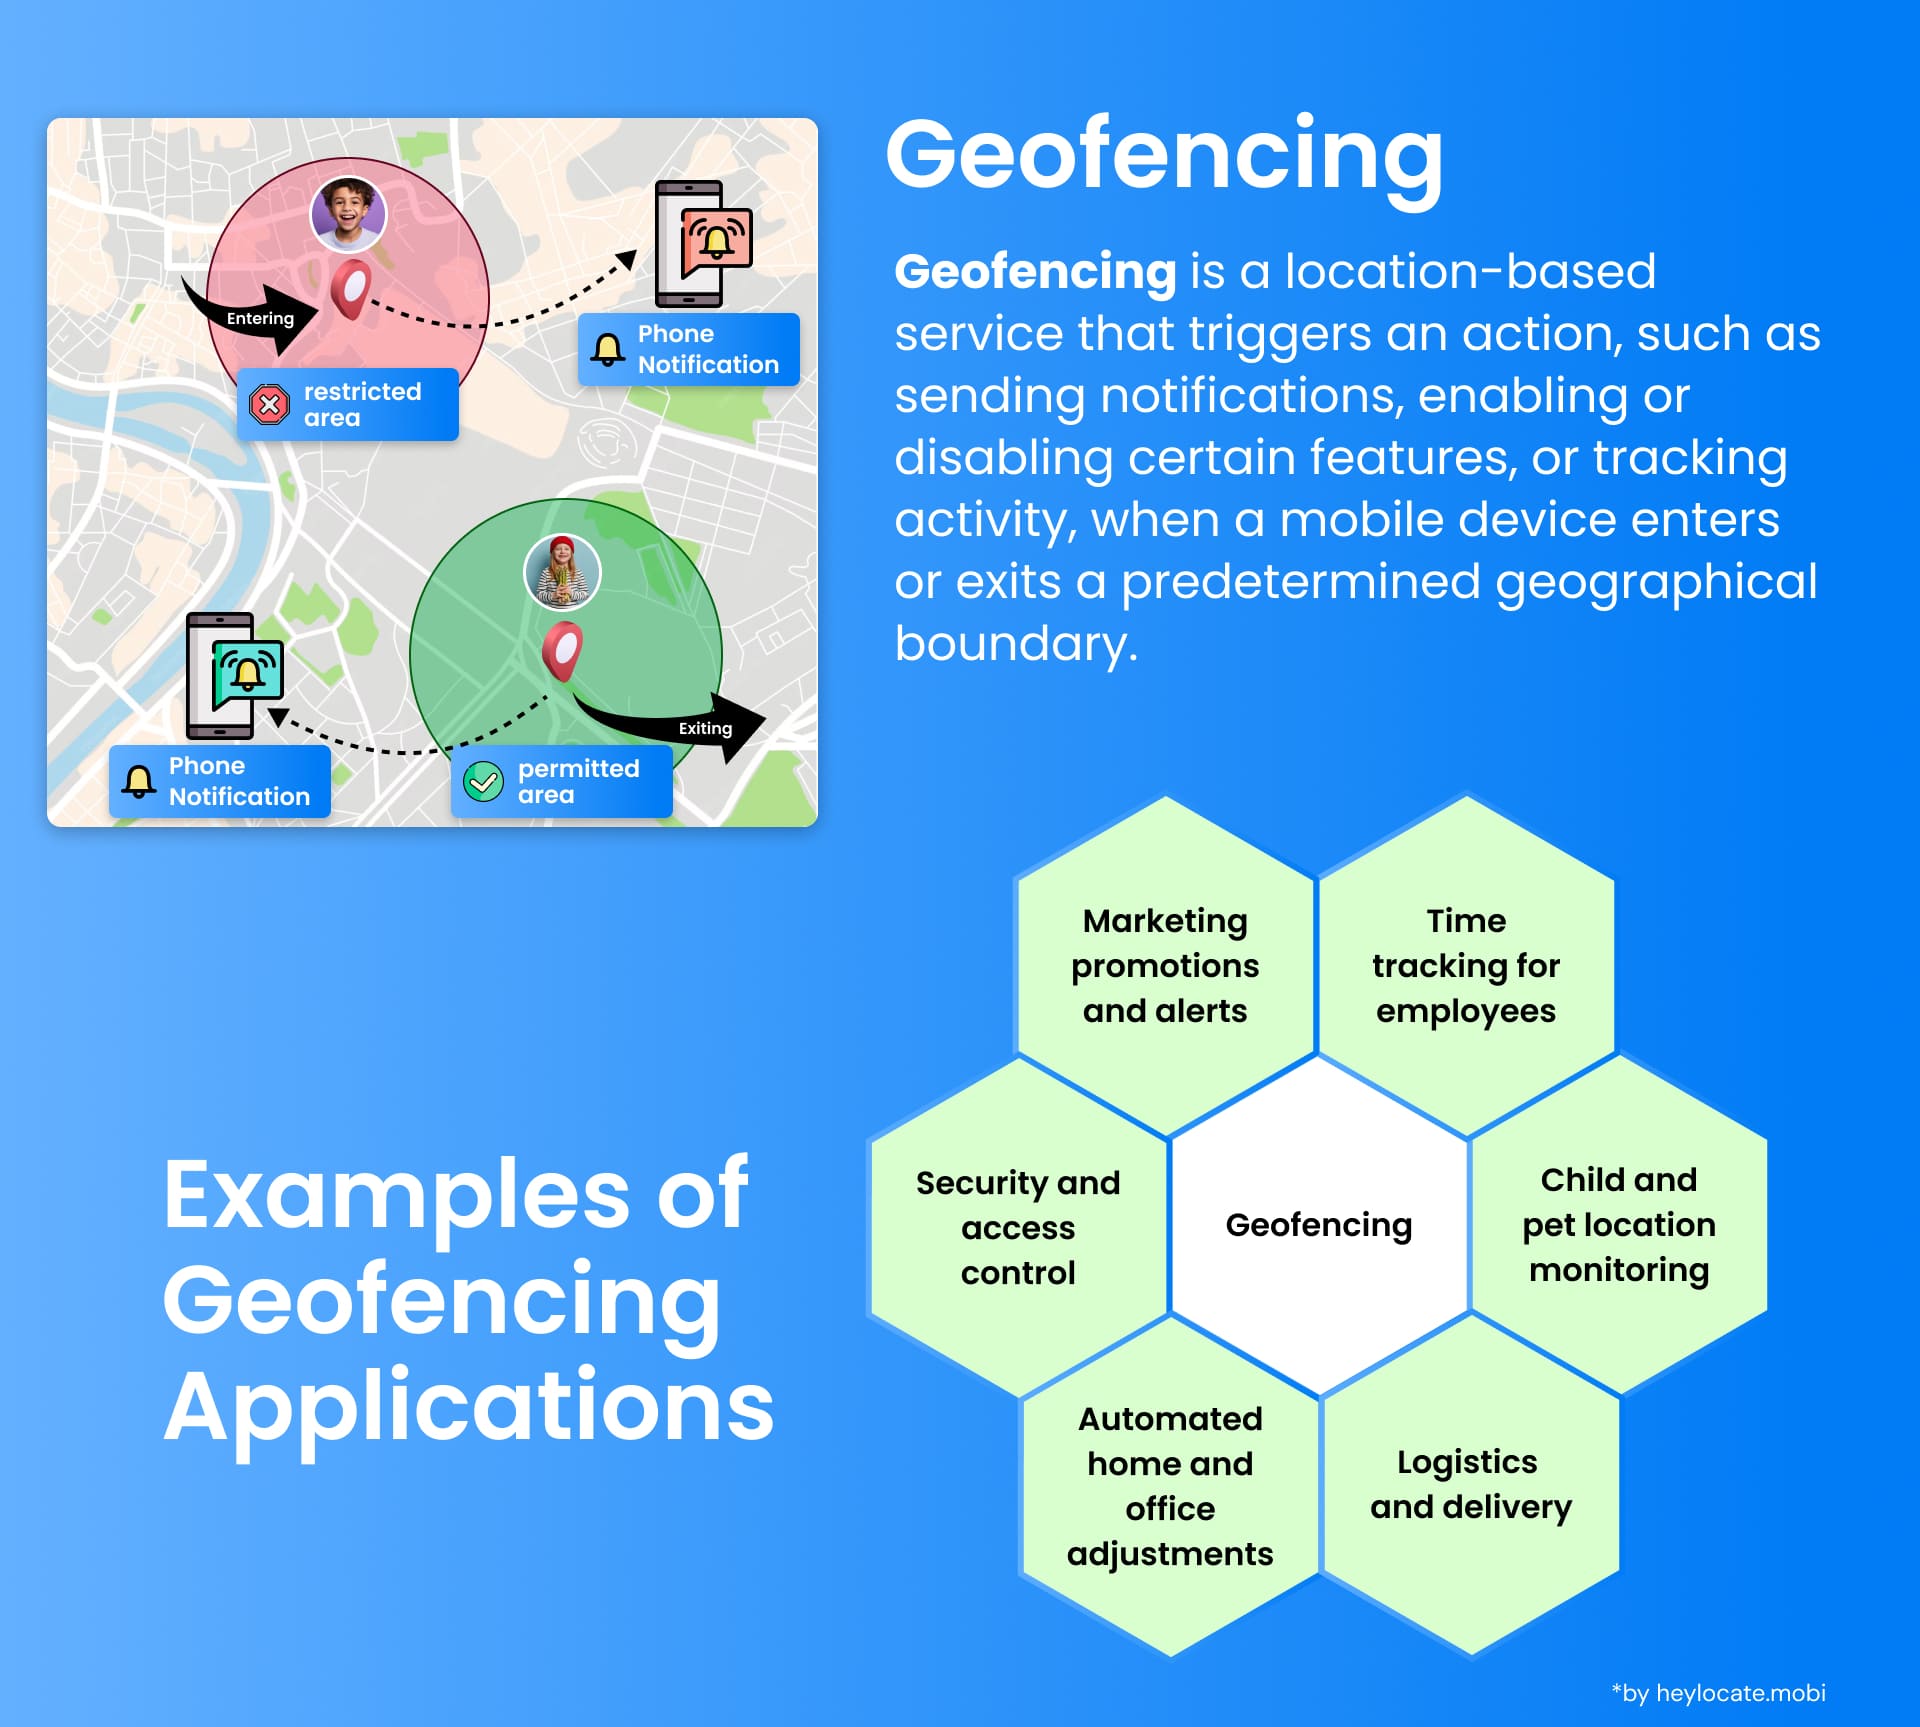 Infographic explaining geofencing with visual cues for restricted and permitted areas, and examples of use cases